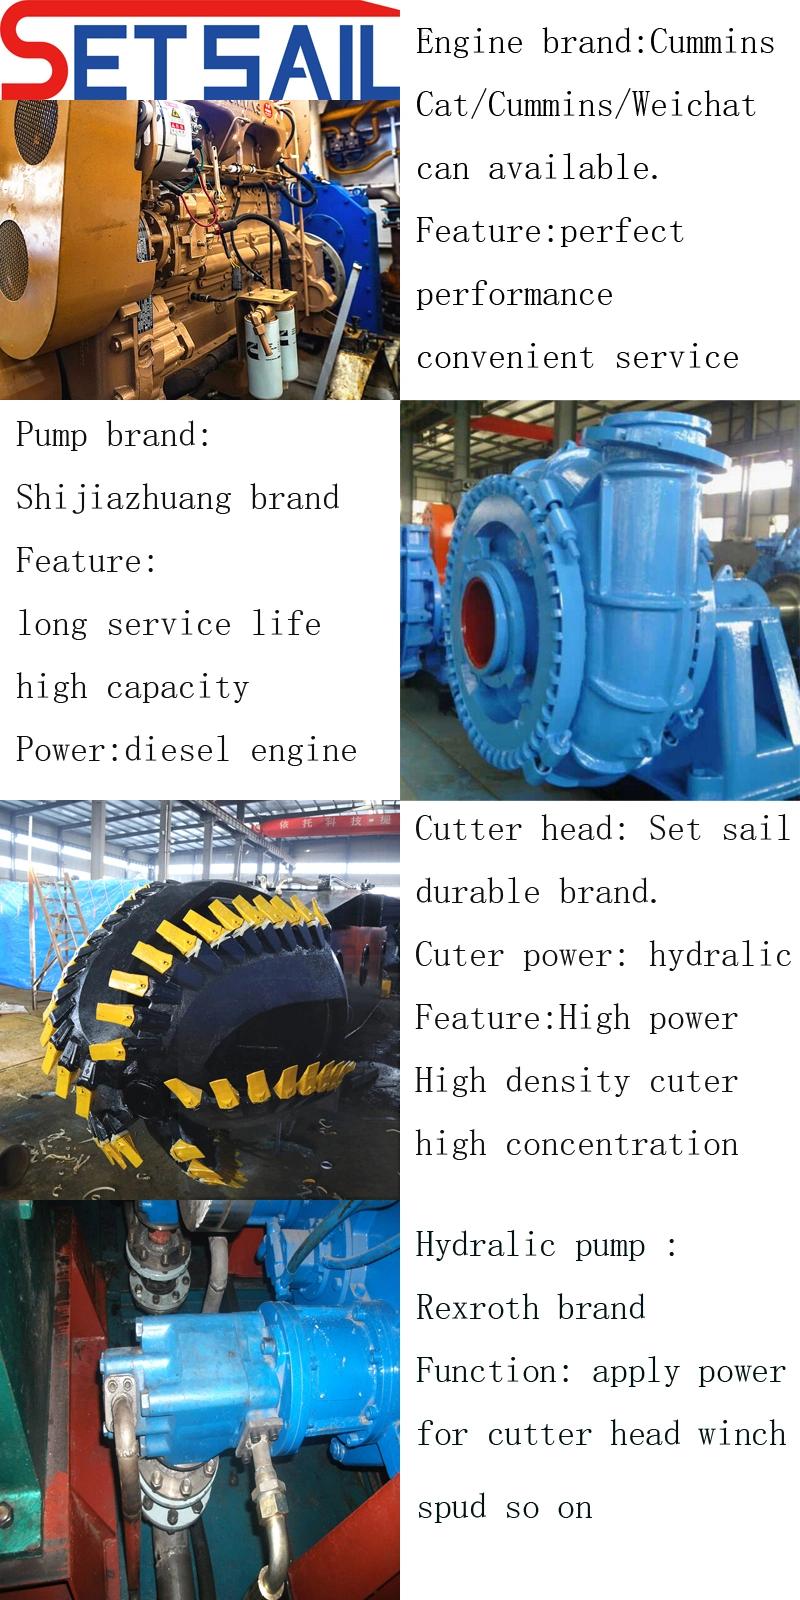 Cutter Suction Sand Pump 12inch Cutter Suction Dredger with Trolley